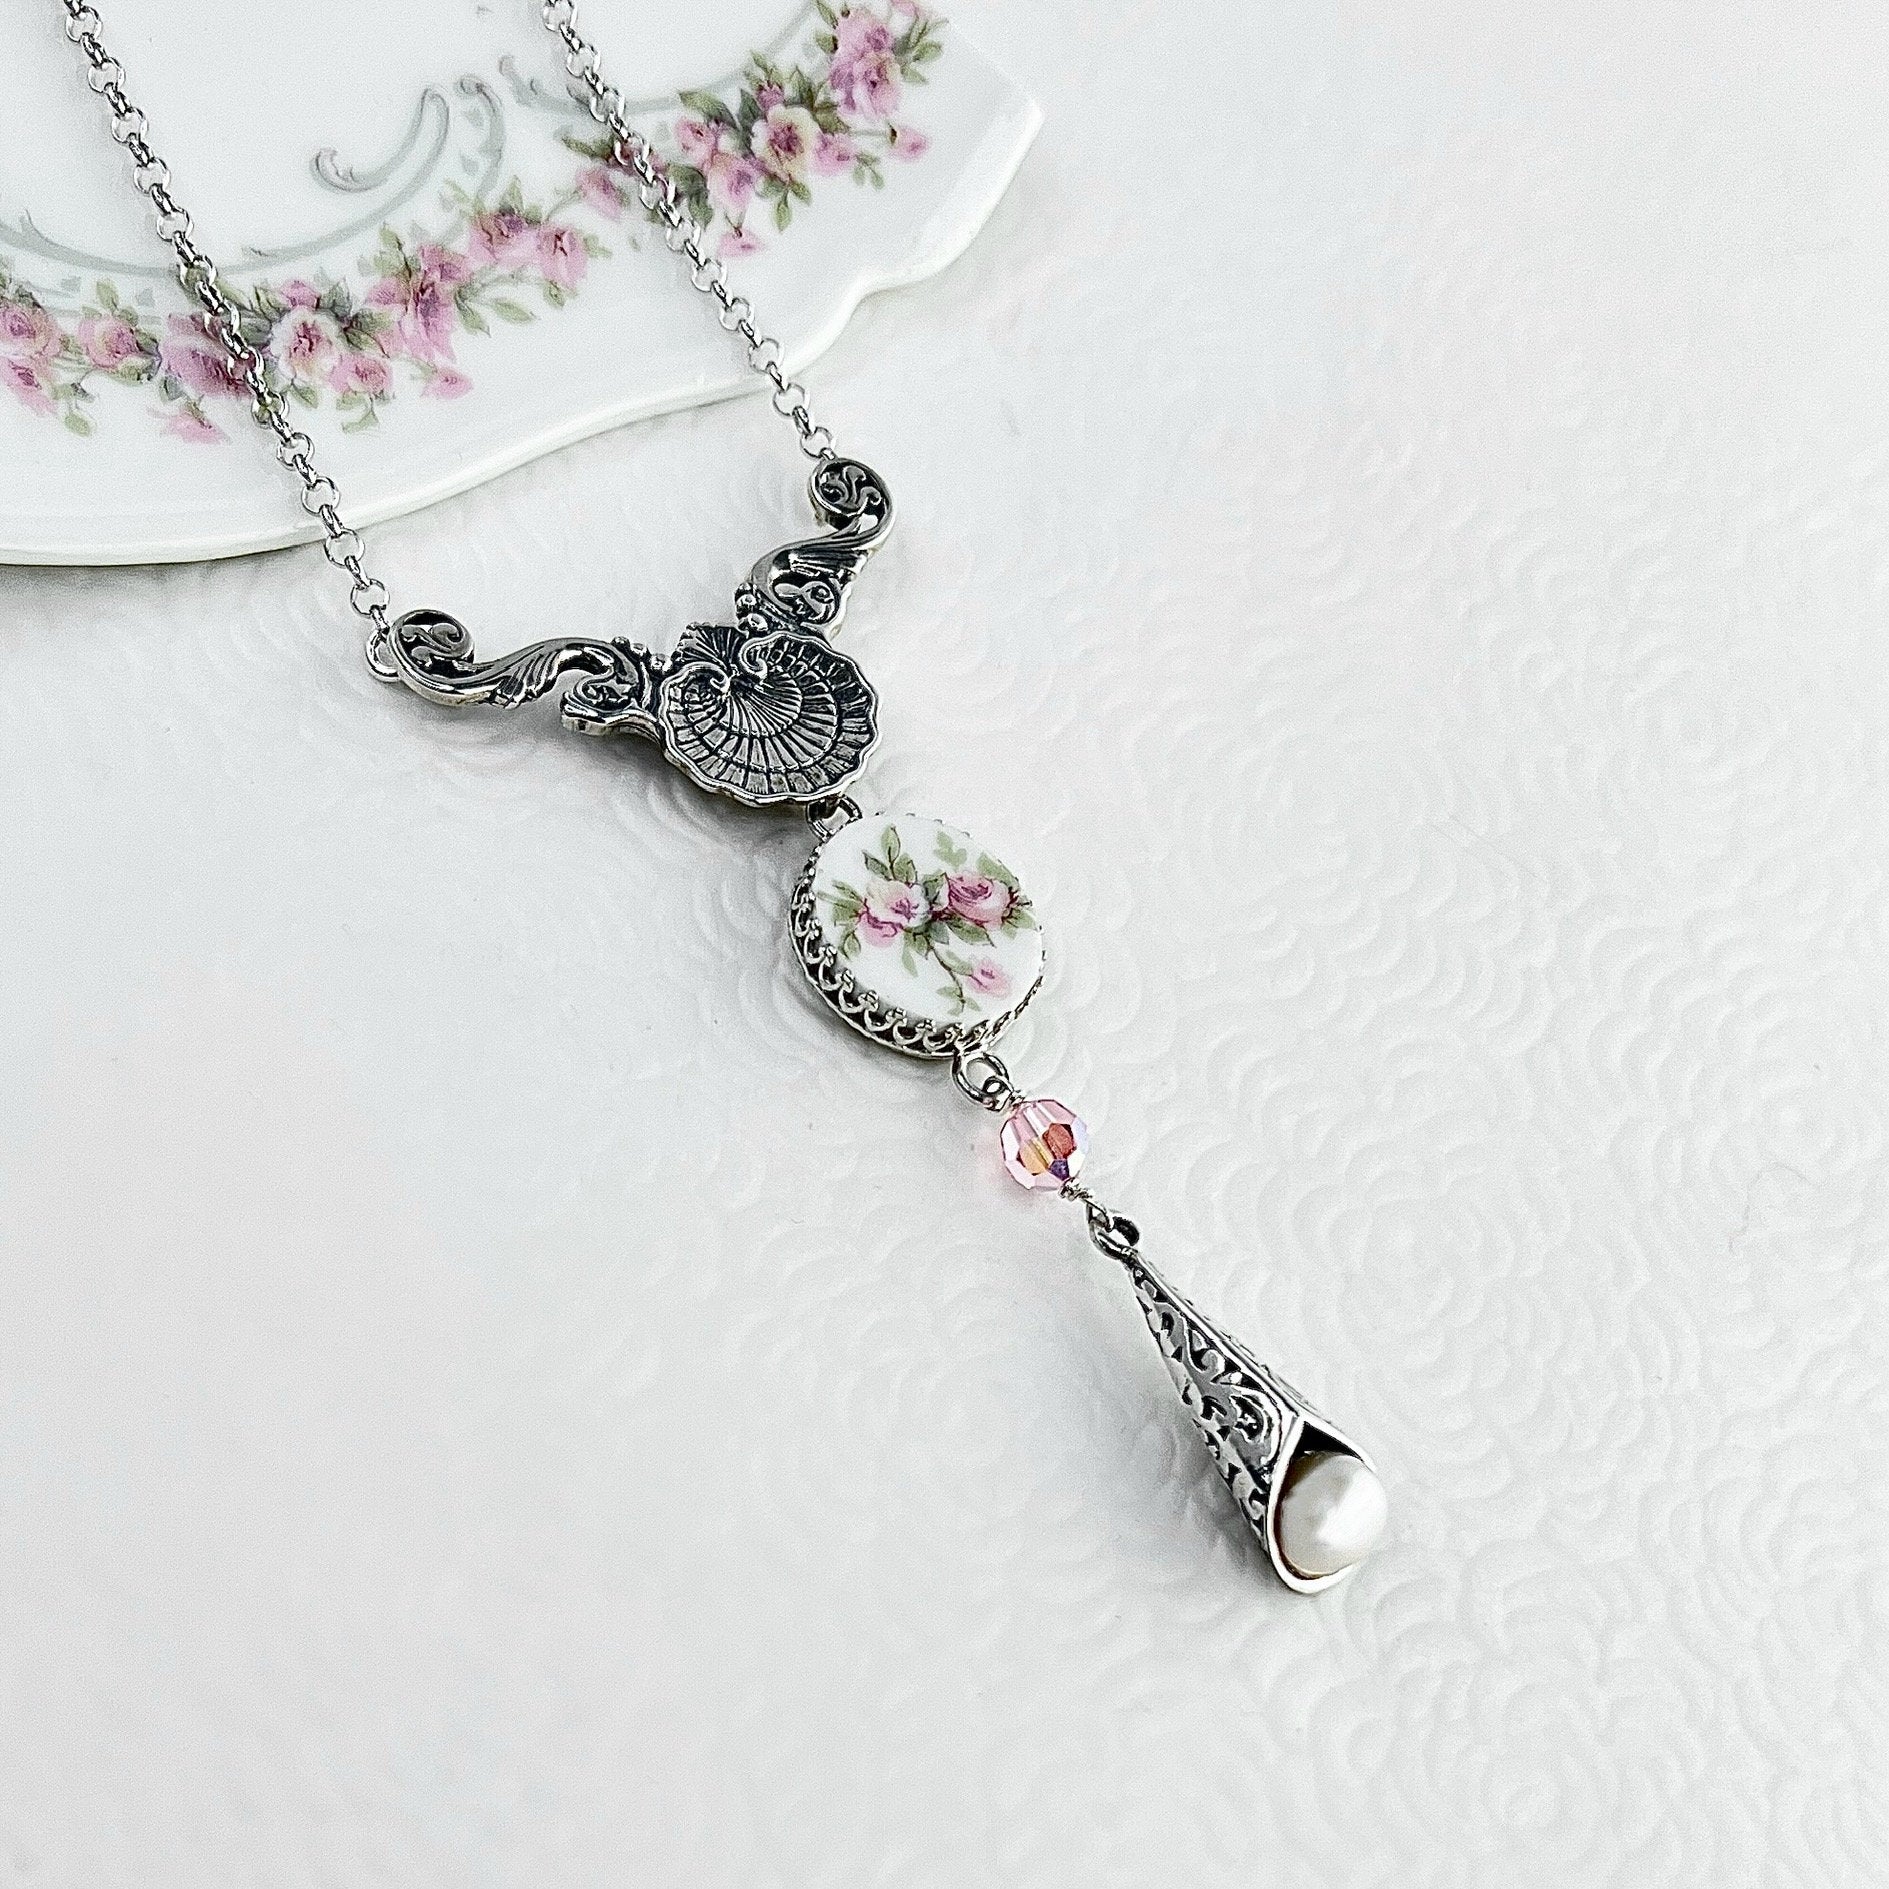 Antique French Limoges Necklace, Rose Broken China Jewelry Necklace, Unique Valentines Day Gift for Her, Pearl Drop Necklace, Victorian Gift